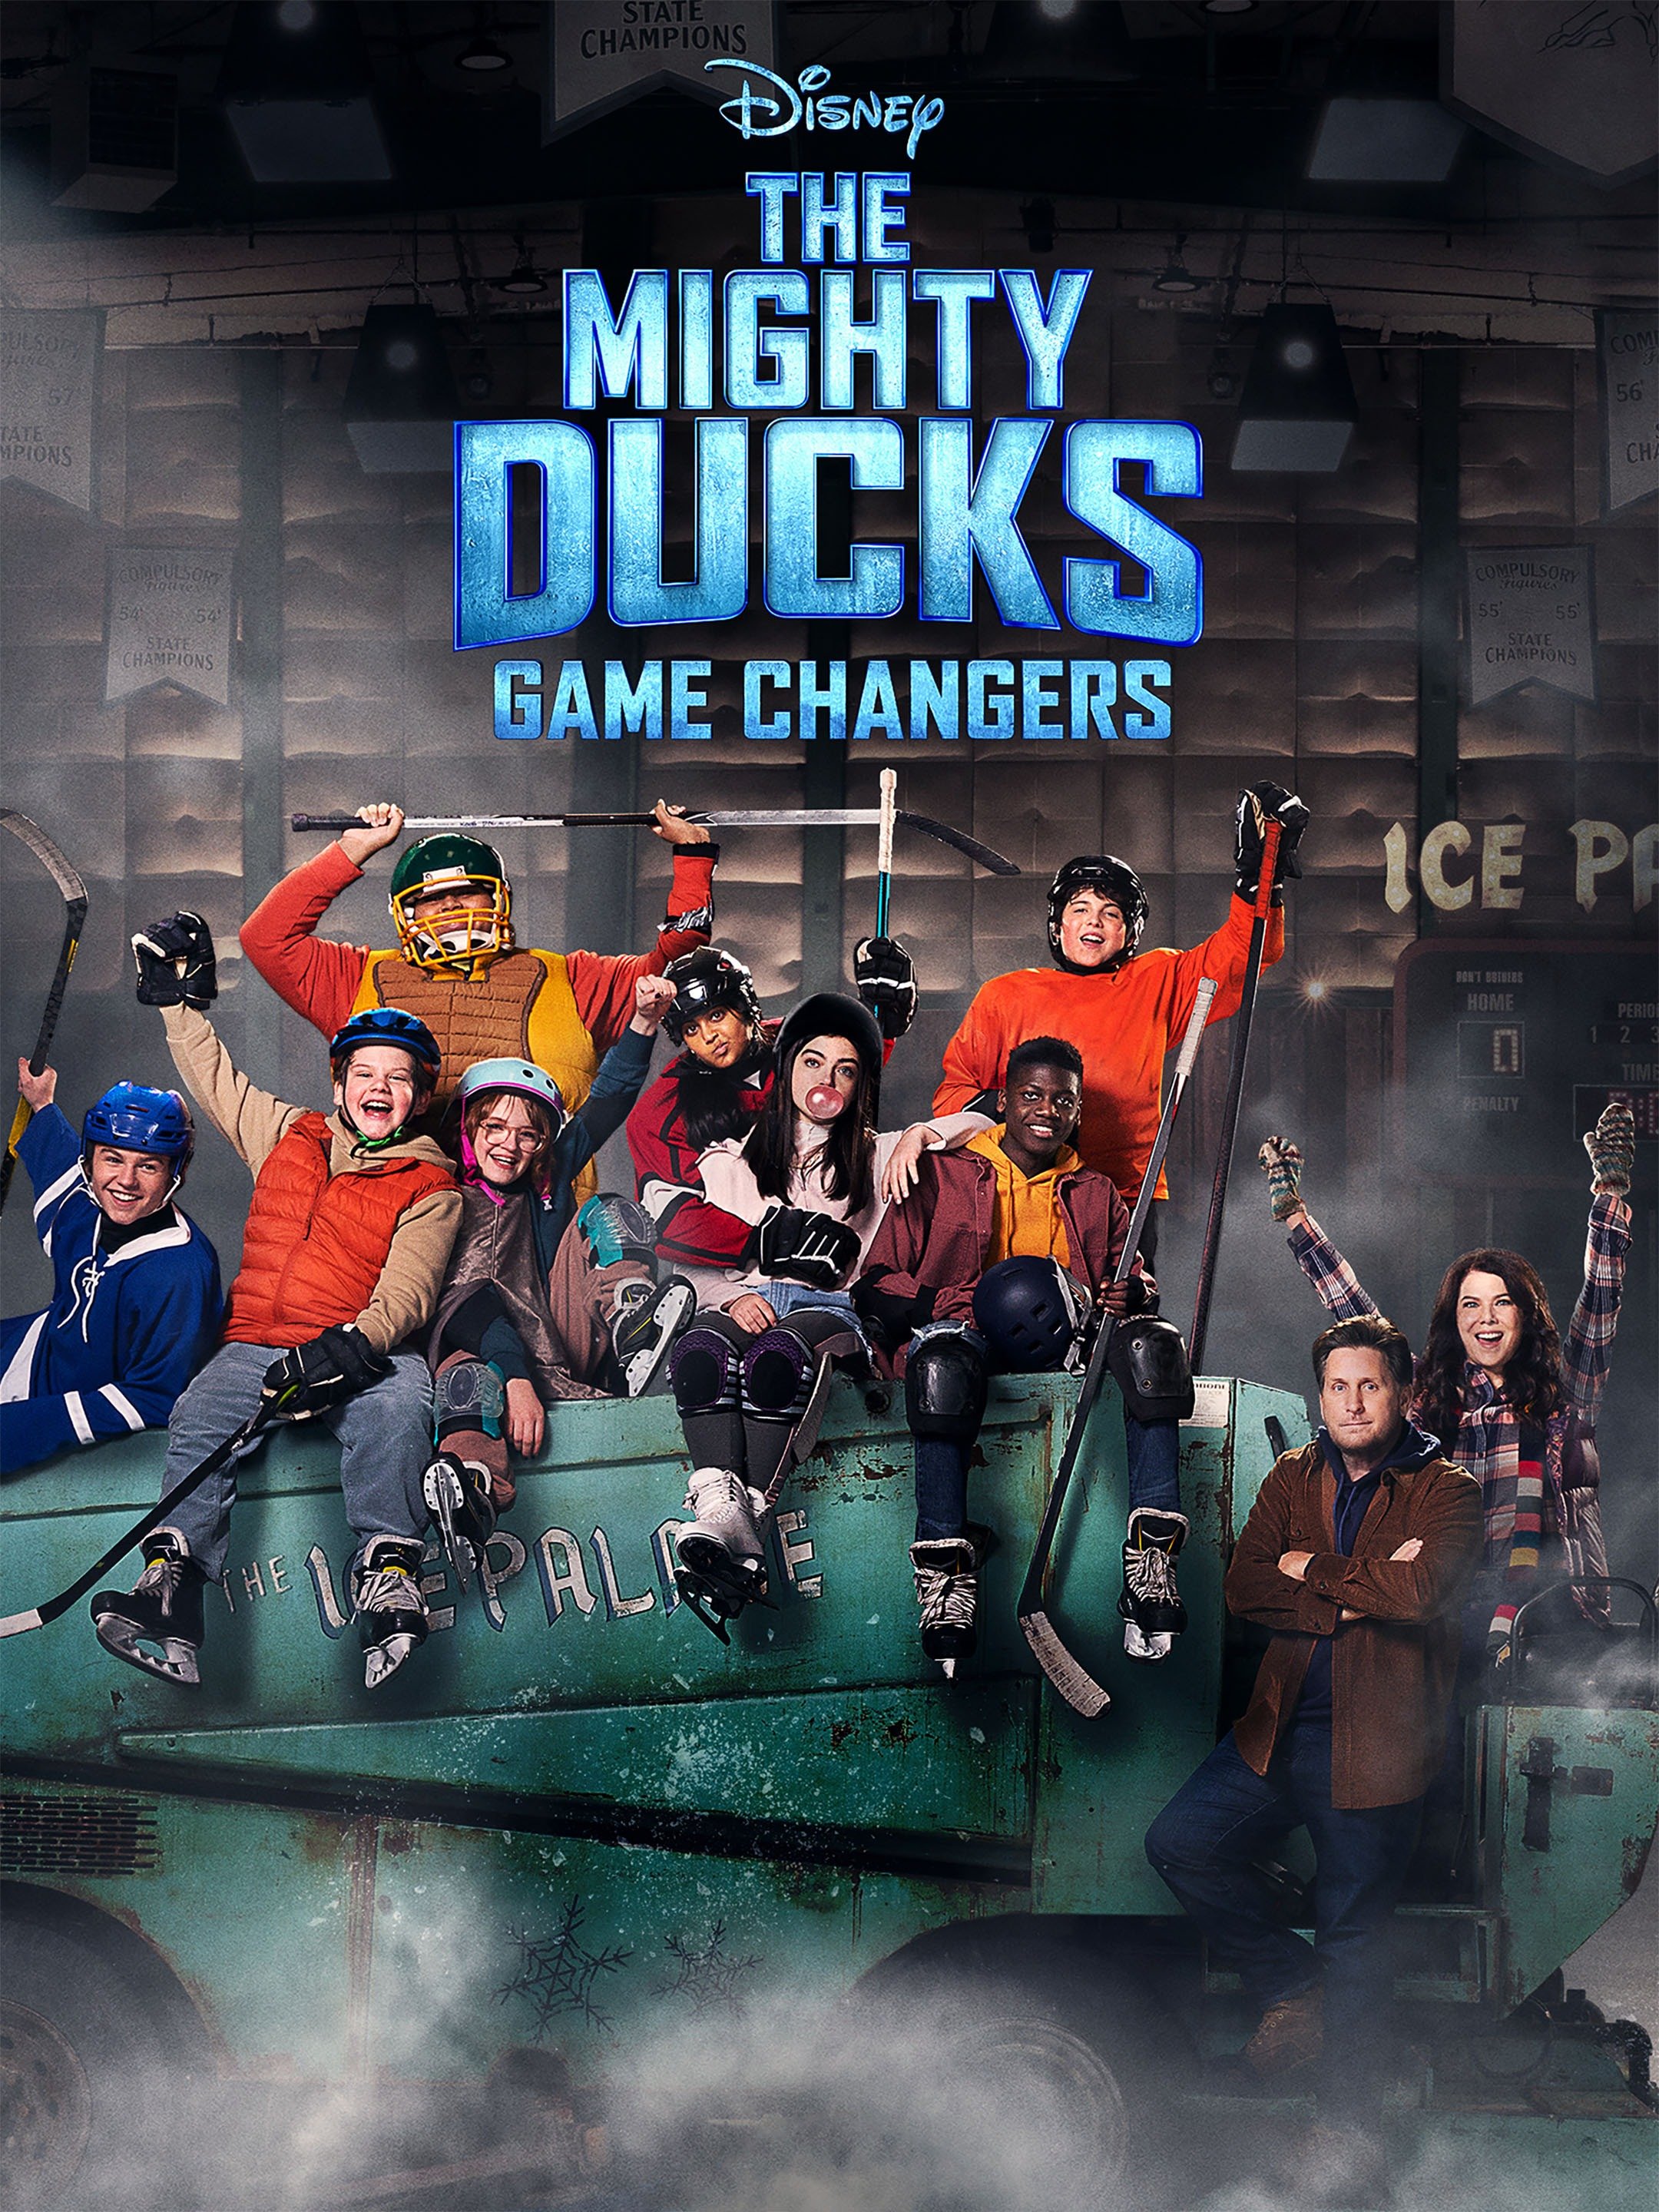 The Mighty Ducks: Game Changers' Cast on Disney+: Your Guide